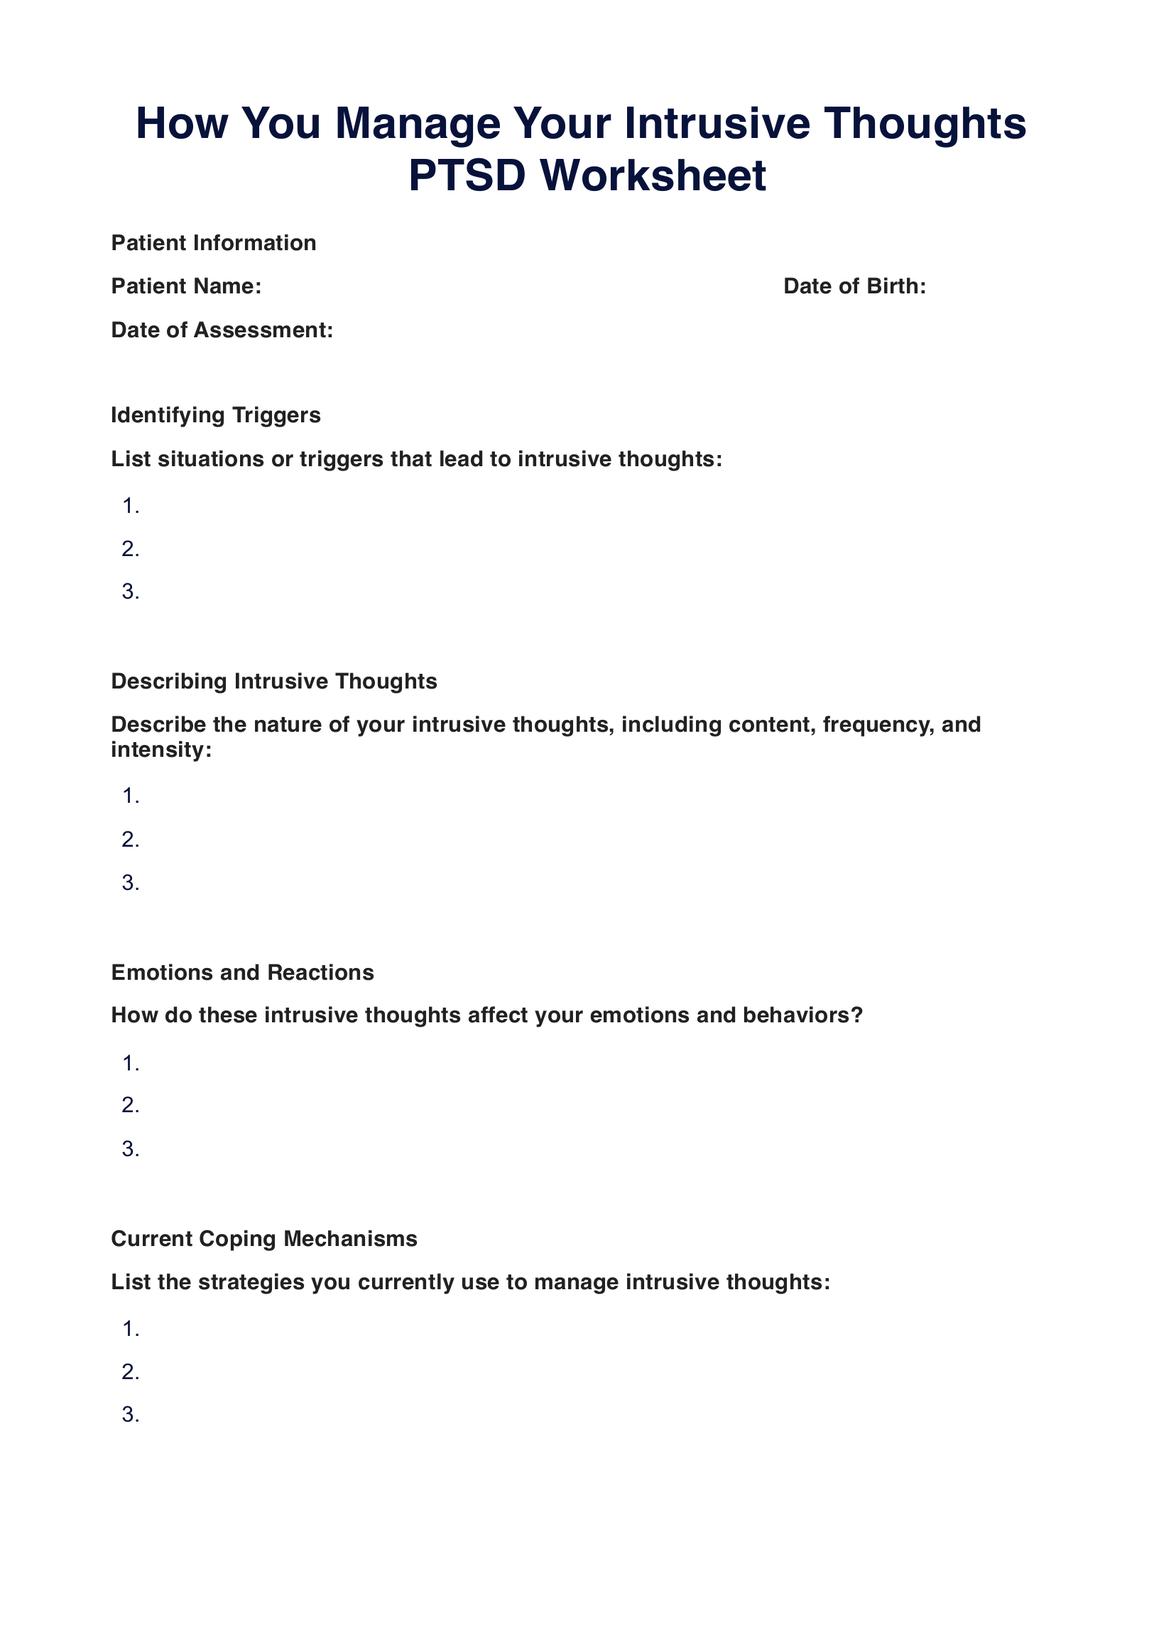 How You Manage Your Intrusive Thoughts PTSD Worksheet PDF Example